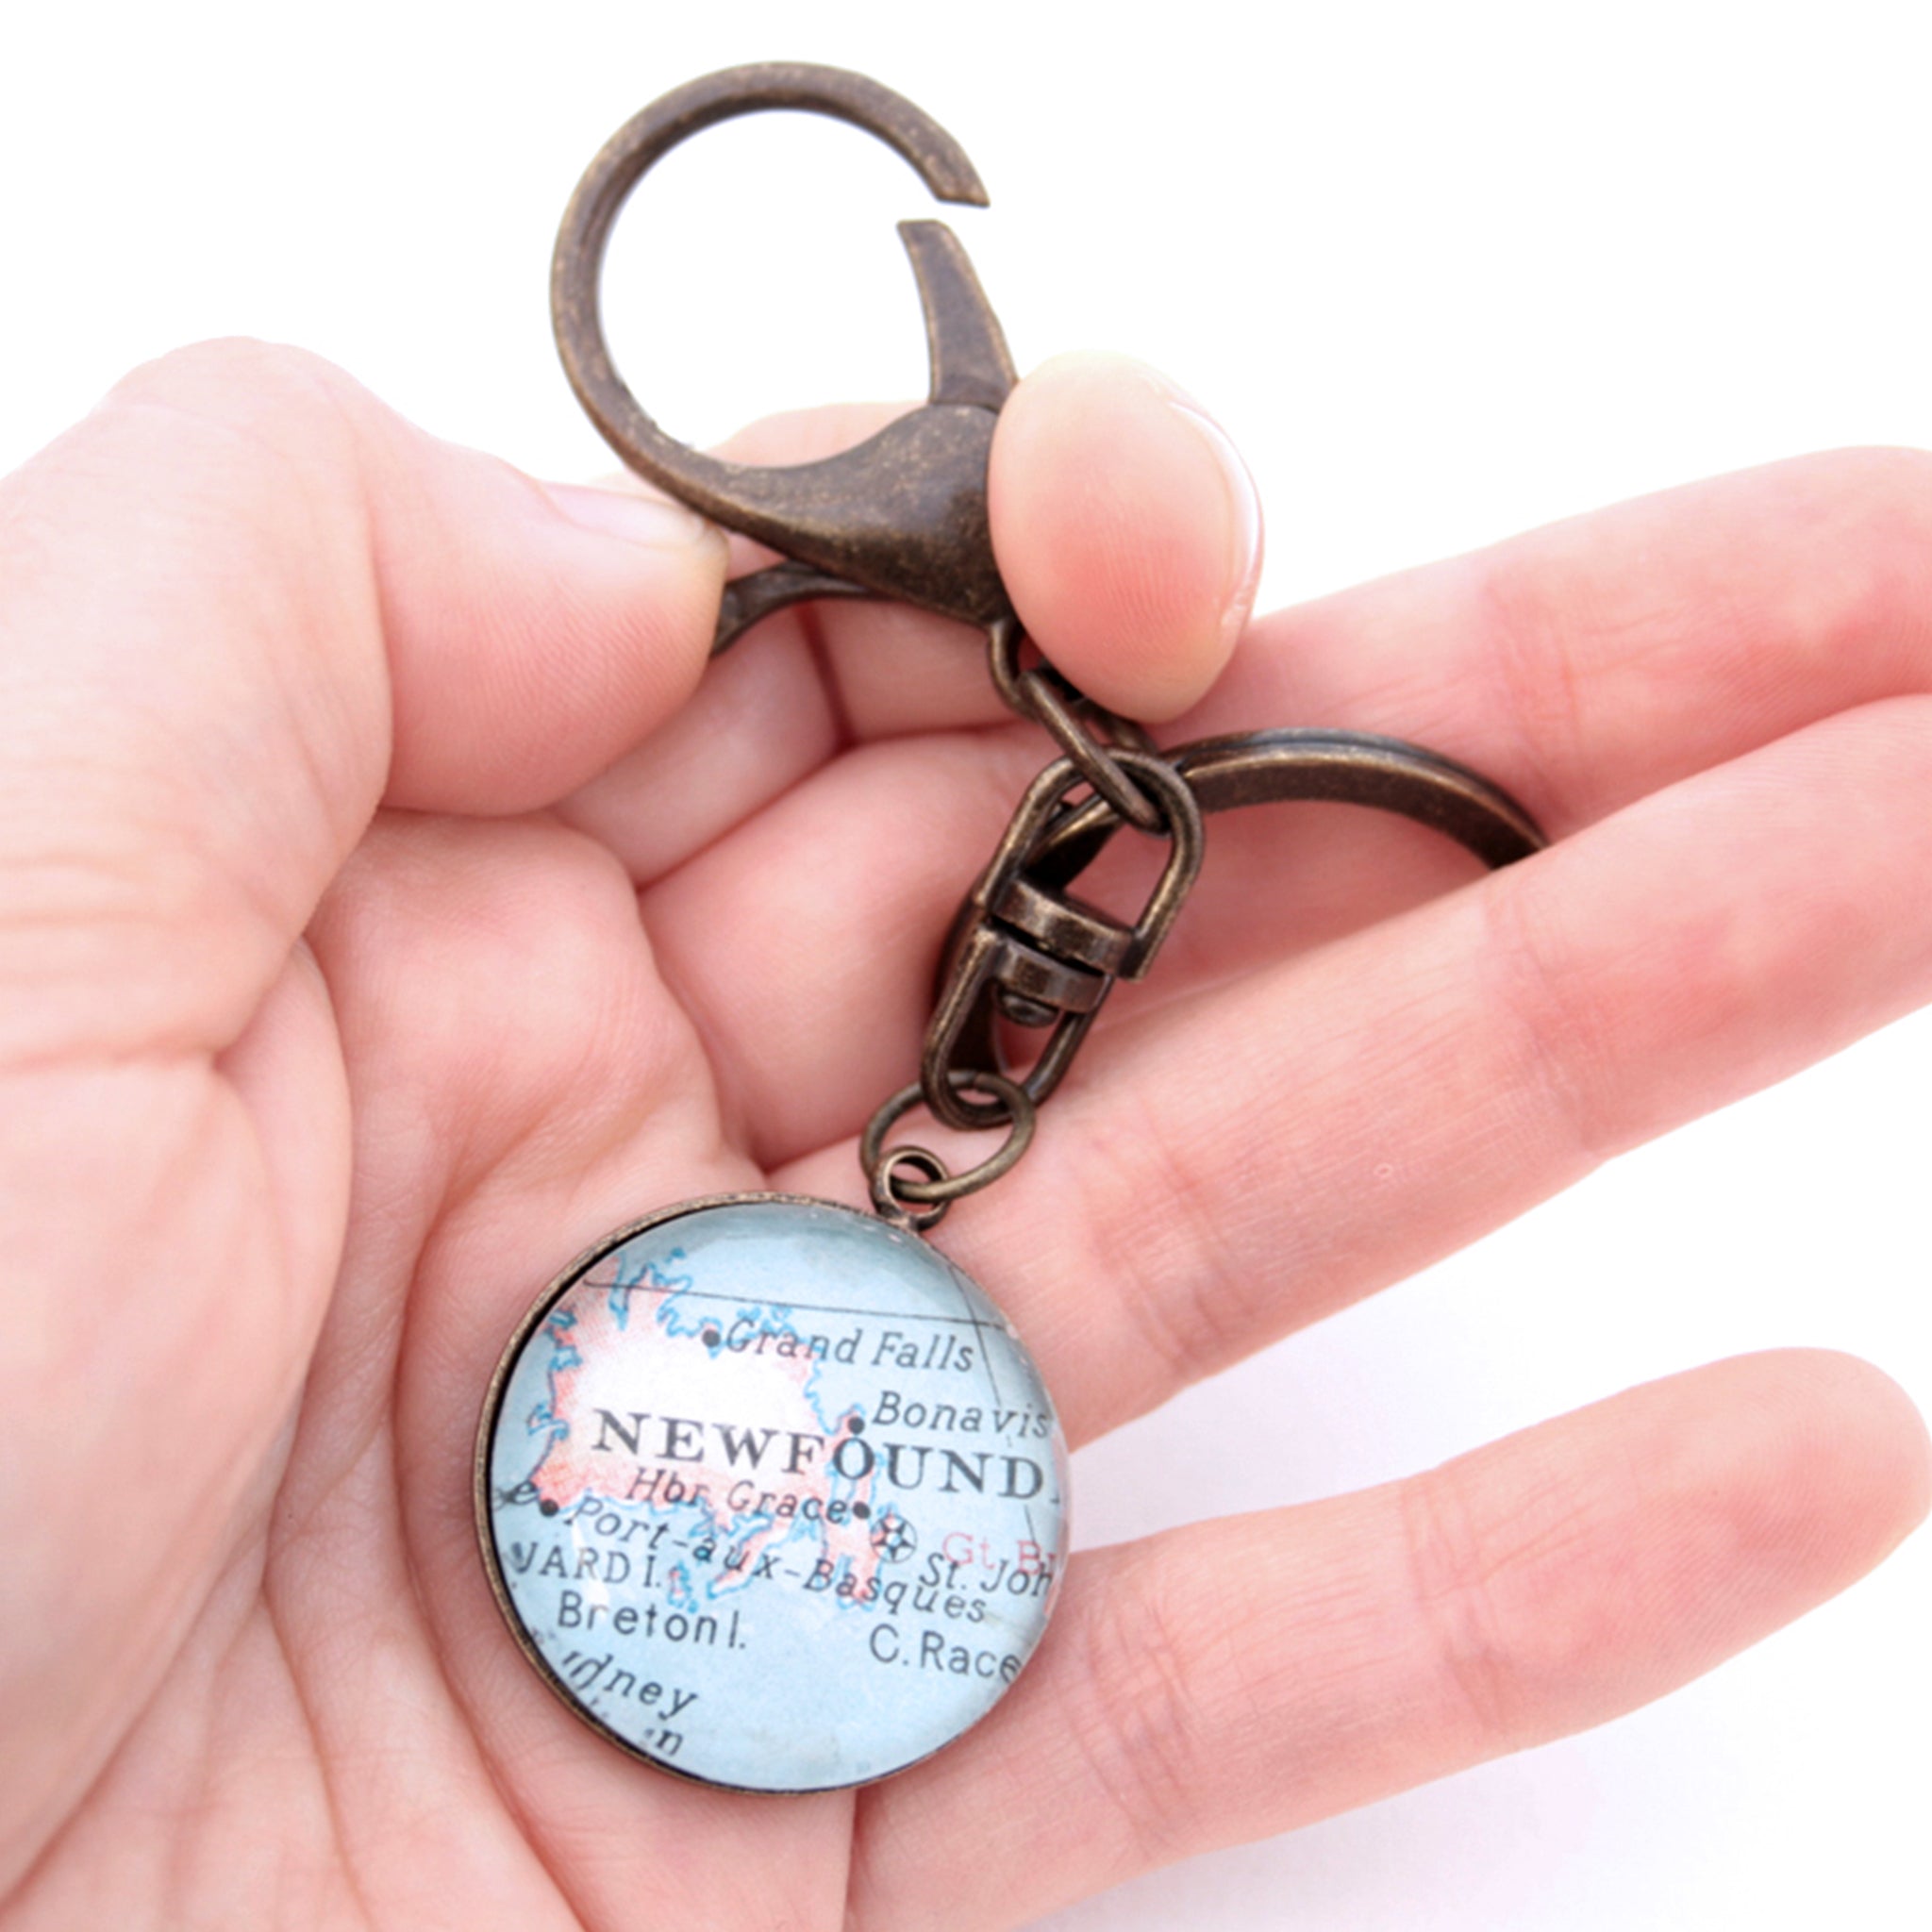 HOld in hand Personalised keyring in antique bronze color featuring map of Newfoundland